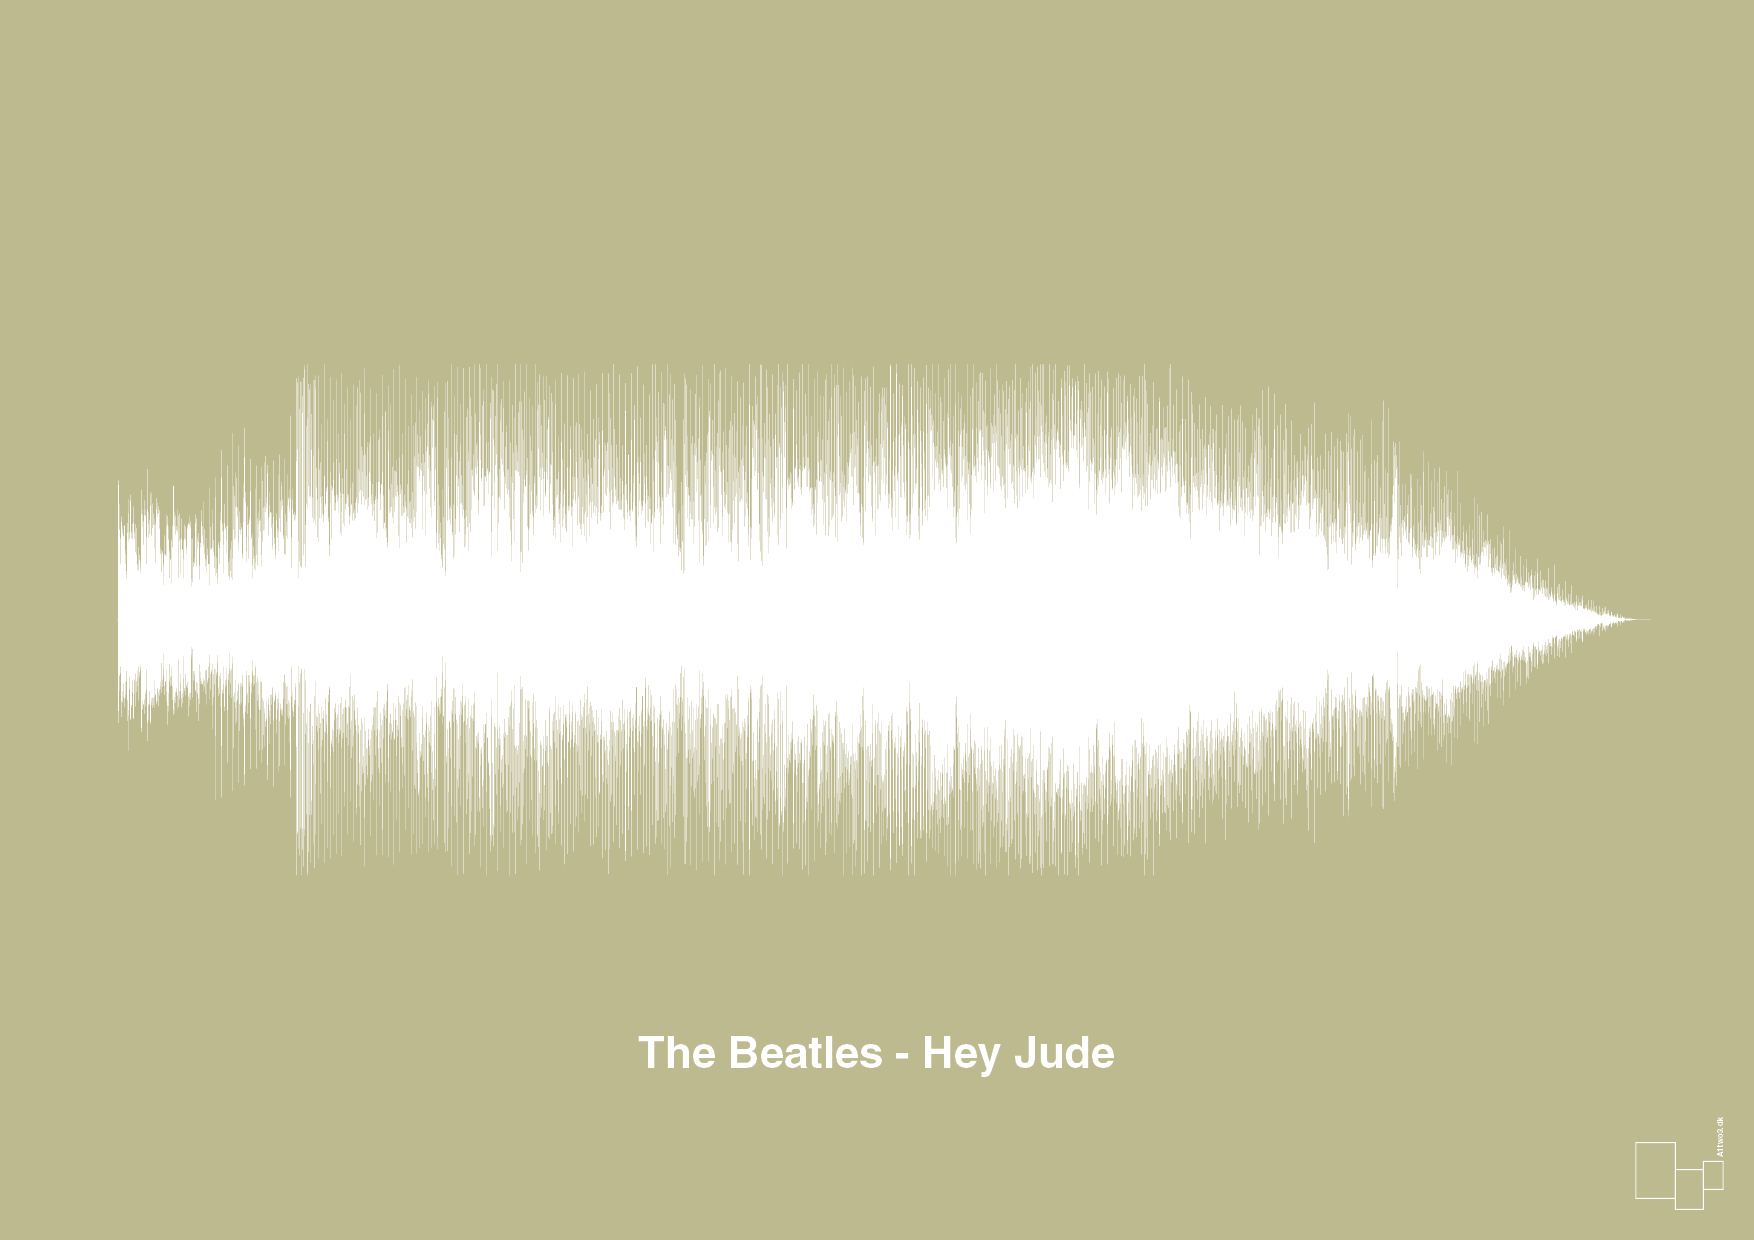 the beatles - hey jude - Plakat med Musik i Back to Nature